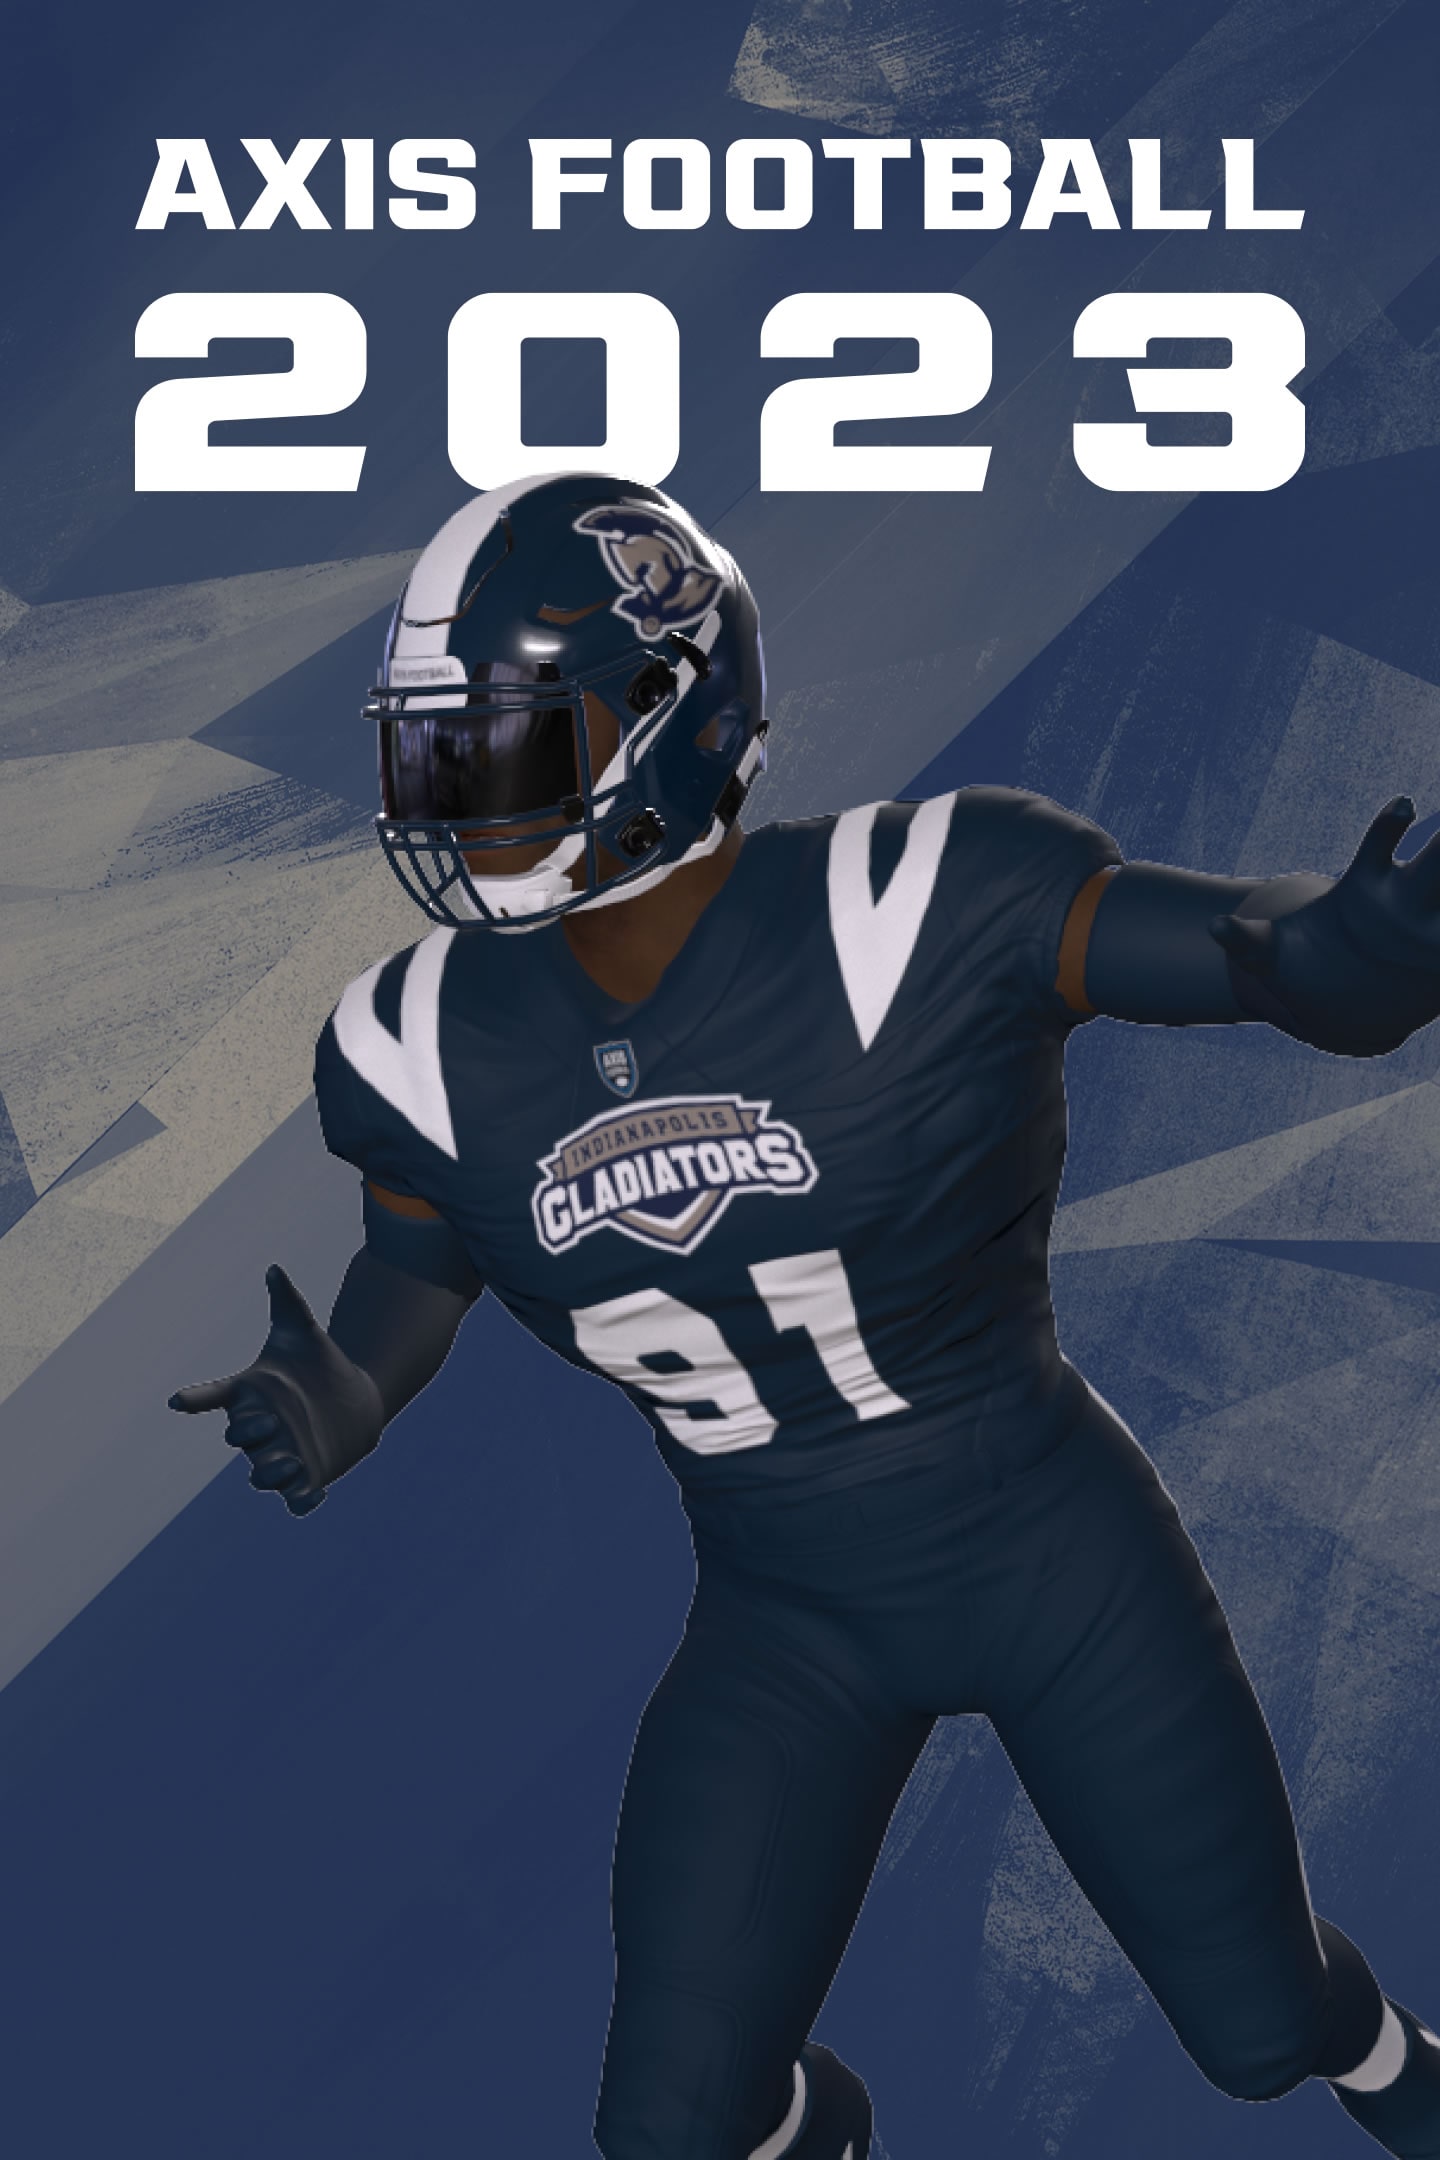 Axis Football 2023 escapeauthority